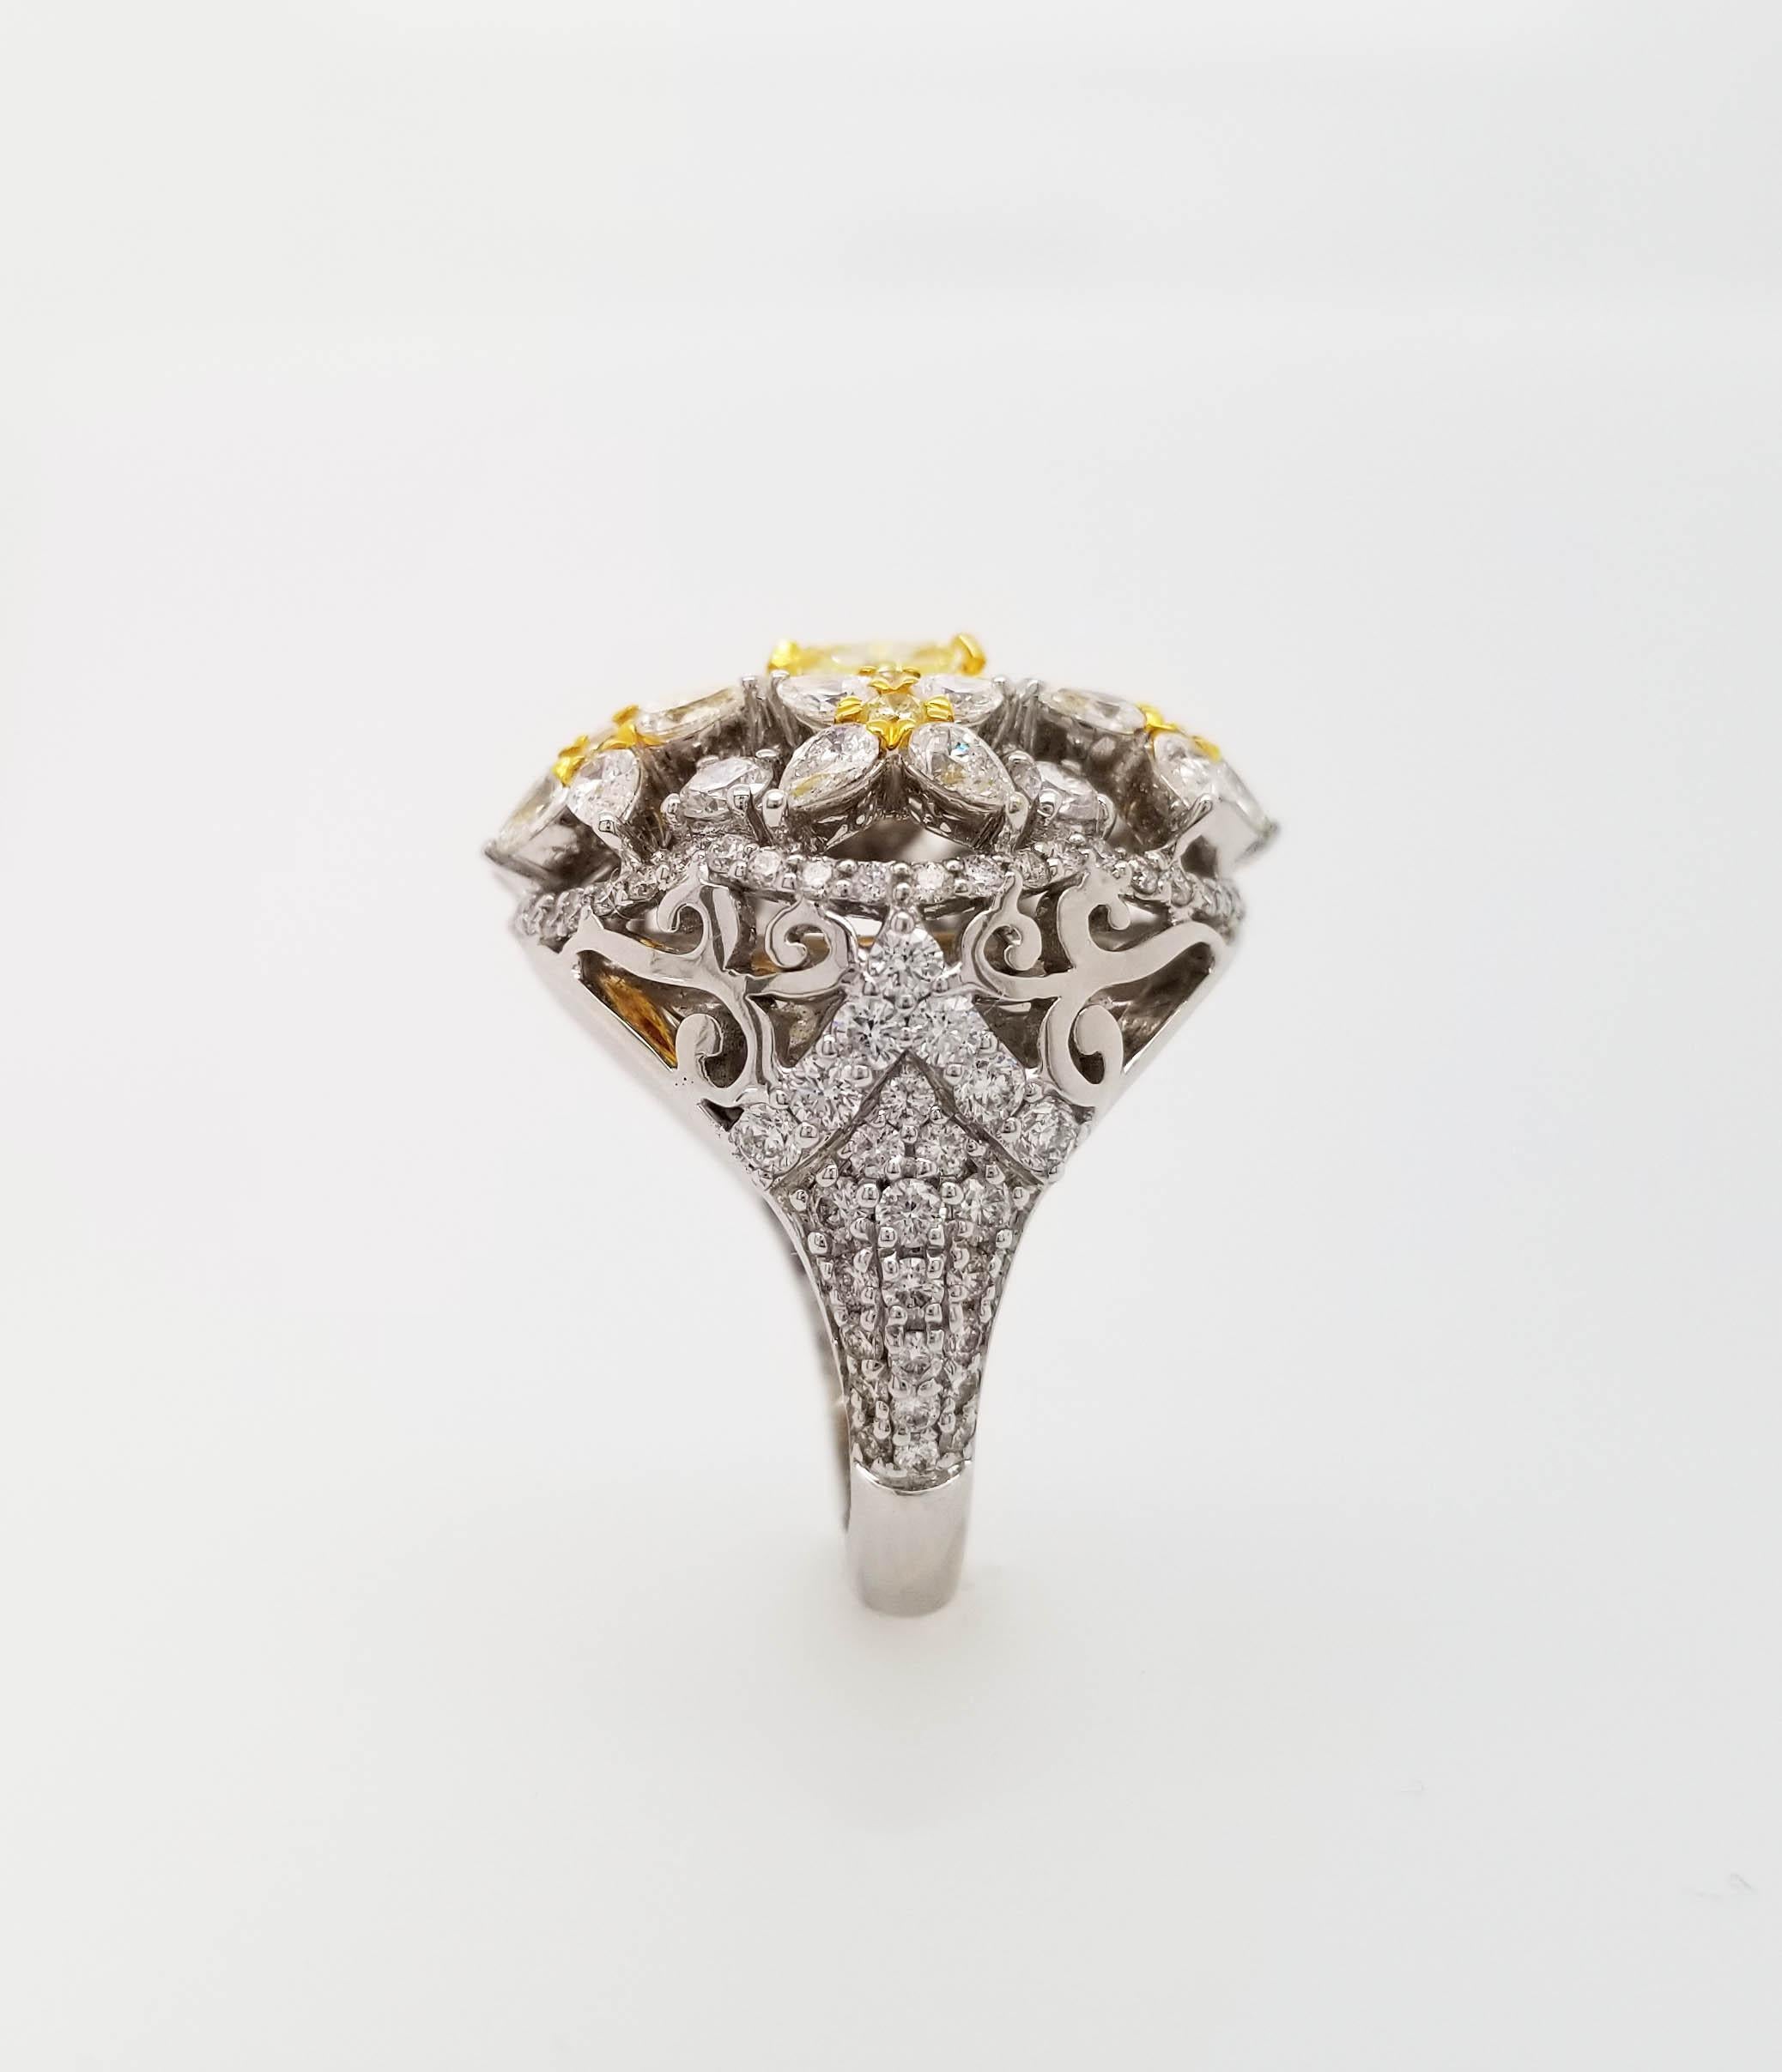 Radiant Cut Scarselli Cocktail Ring with 1.00 Carat Fancy Yellow Radiant Diamonds GIA